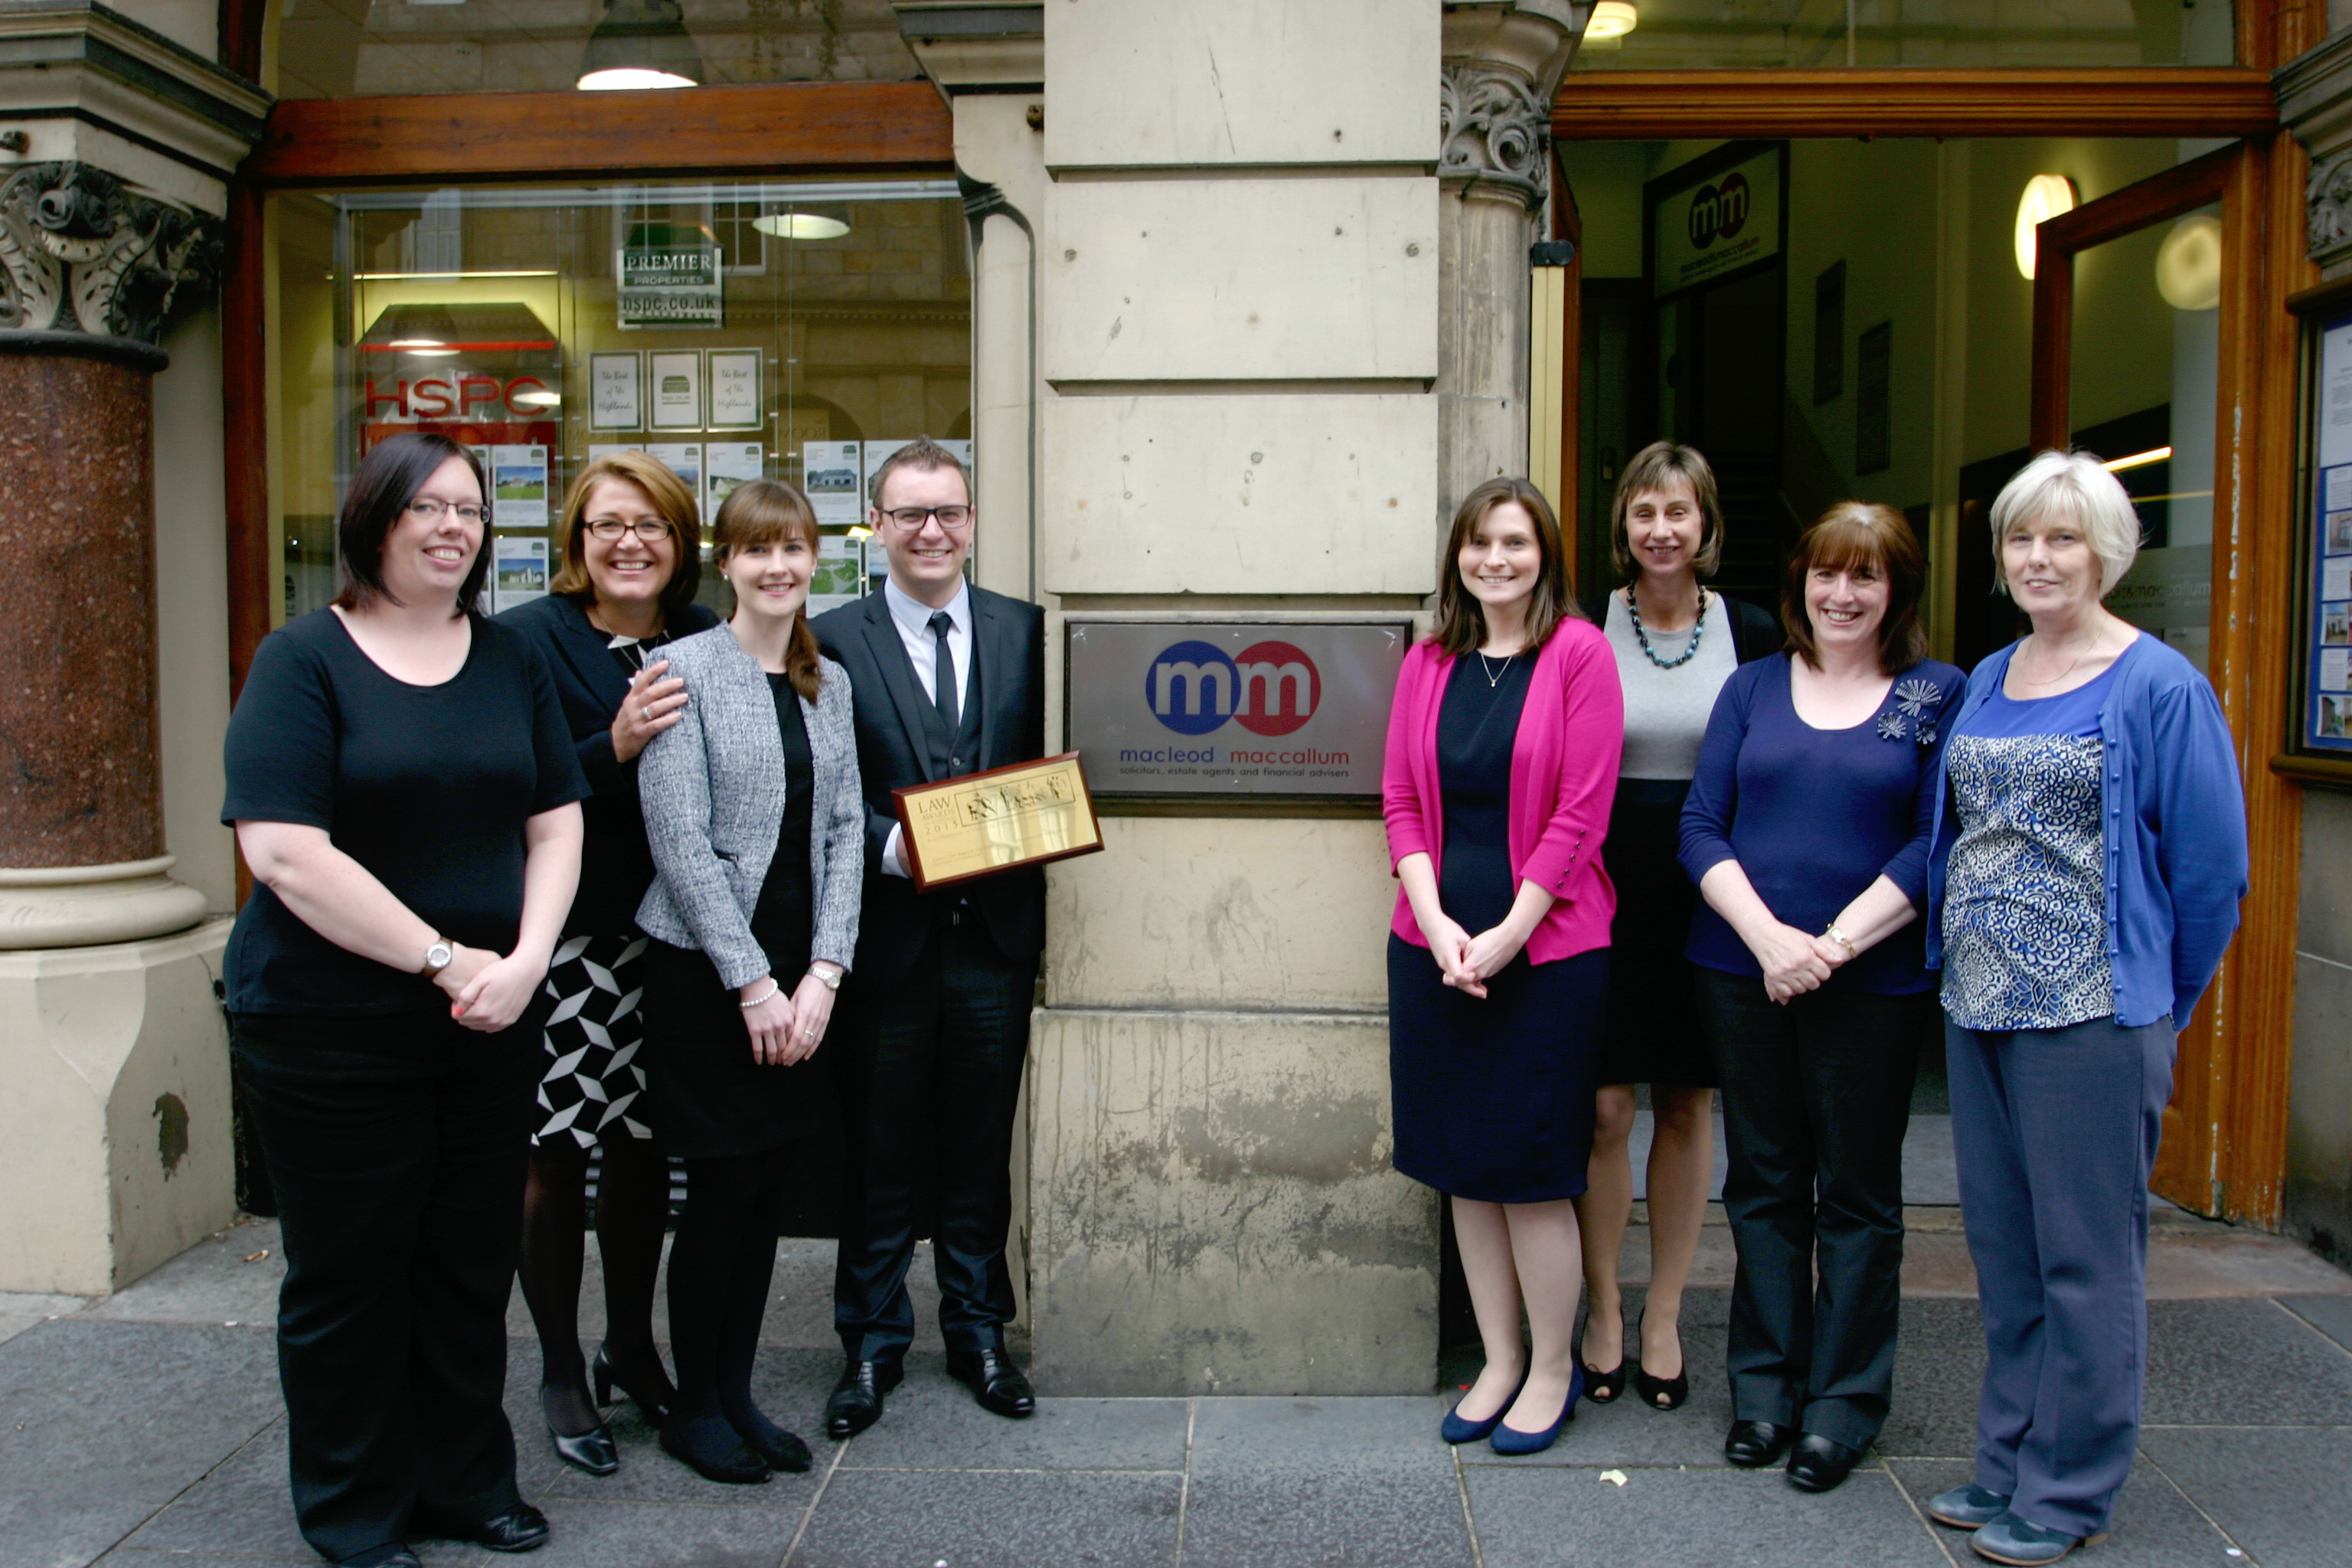 The Family Law team outside Macleod and Maccallum in Inverness